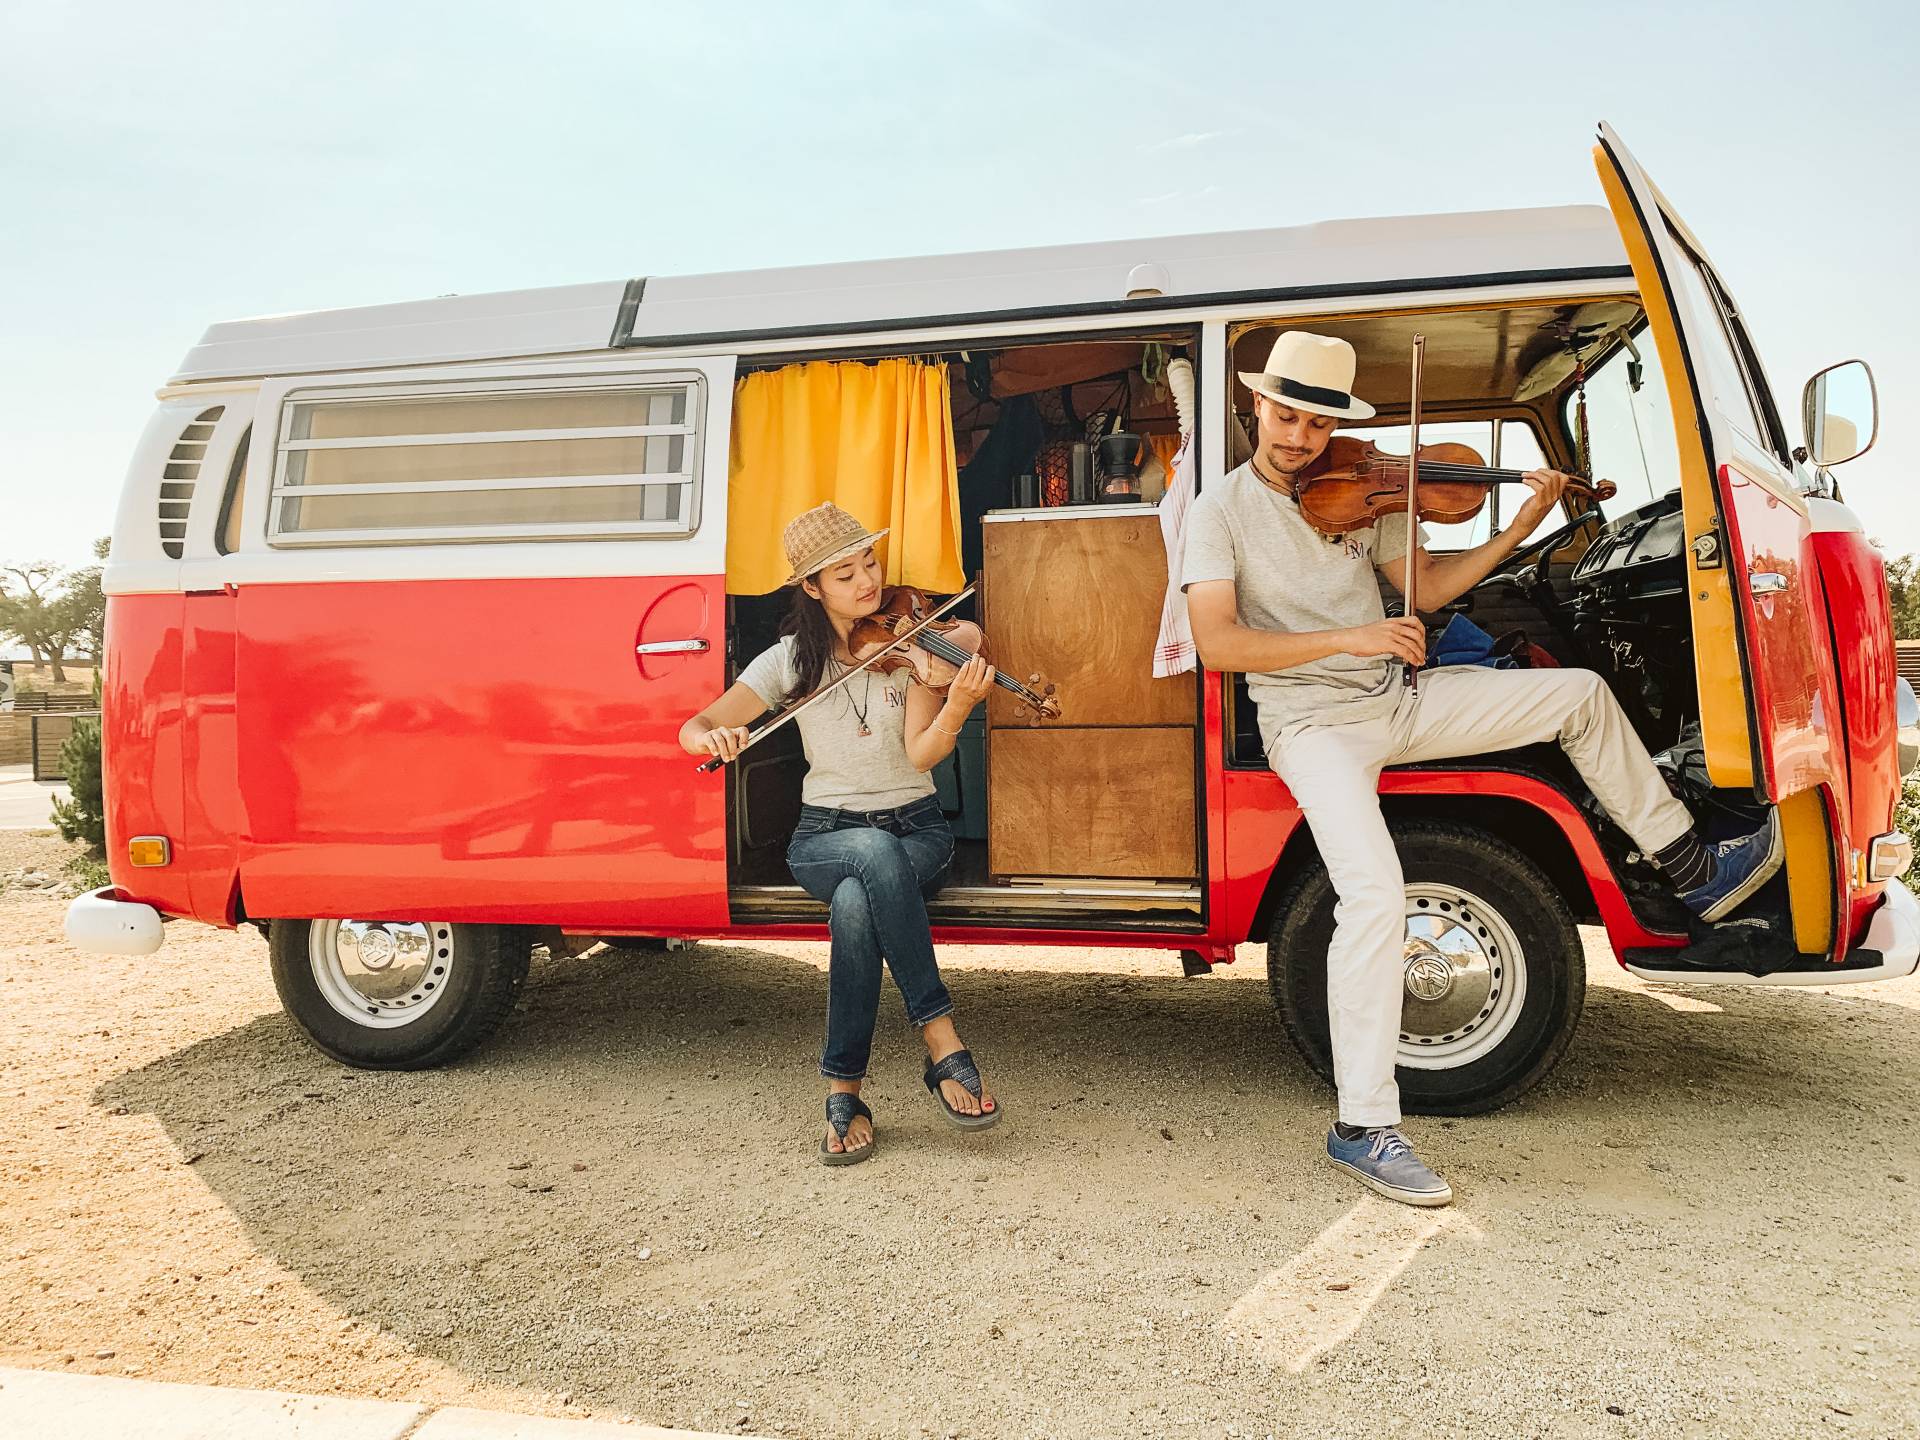 MusiKaravan violinists Etienne Gara and YuEun Kim in Paso Robles with their bright red 1971 VW bus named Boris. Courtesy Lathan J.